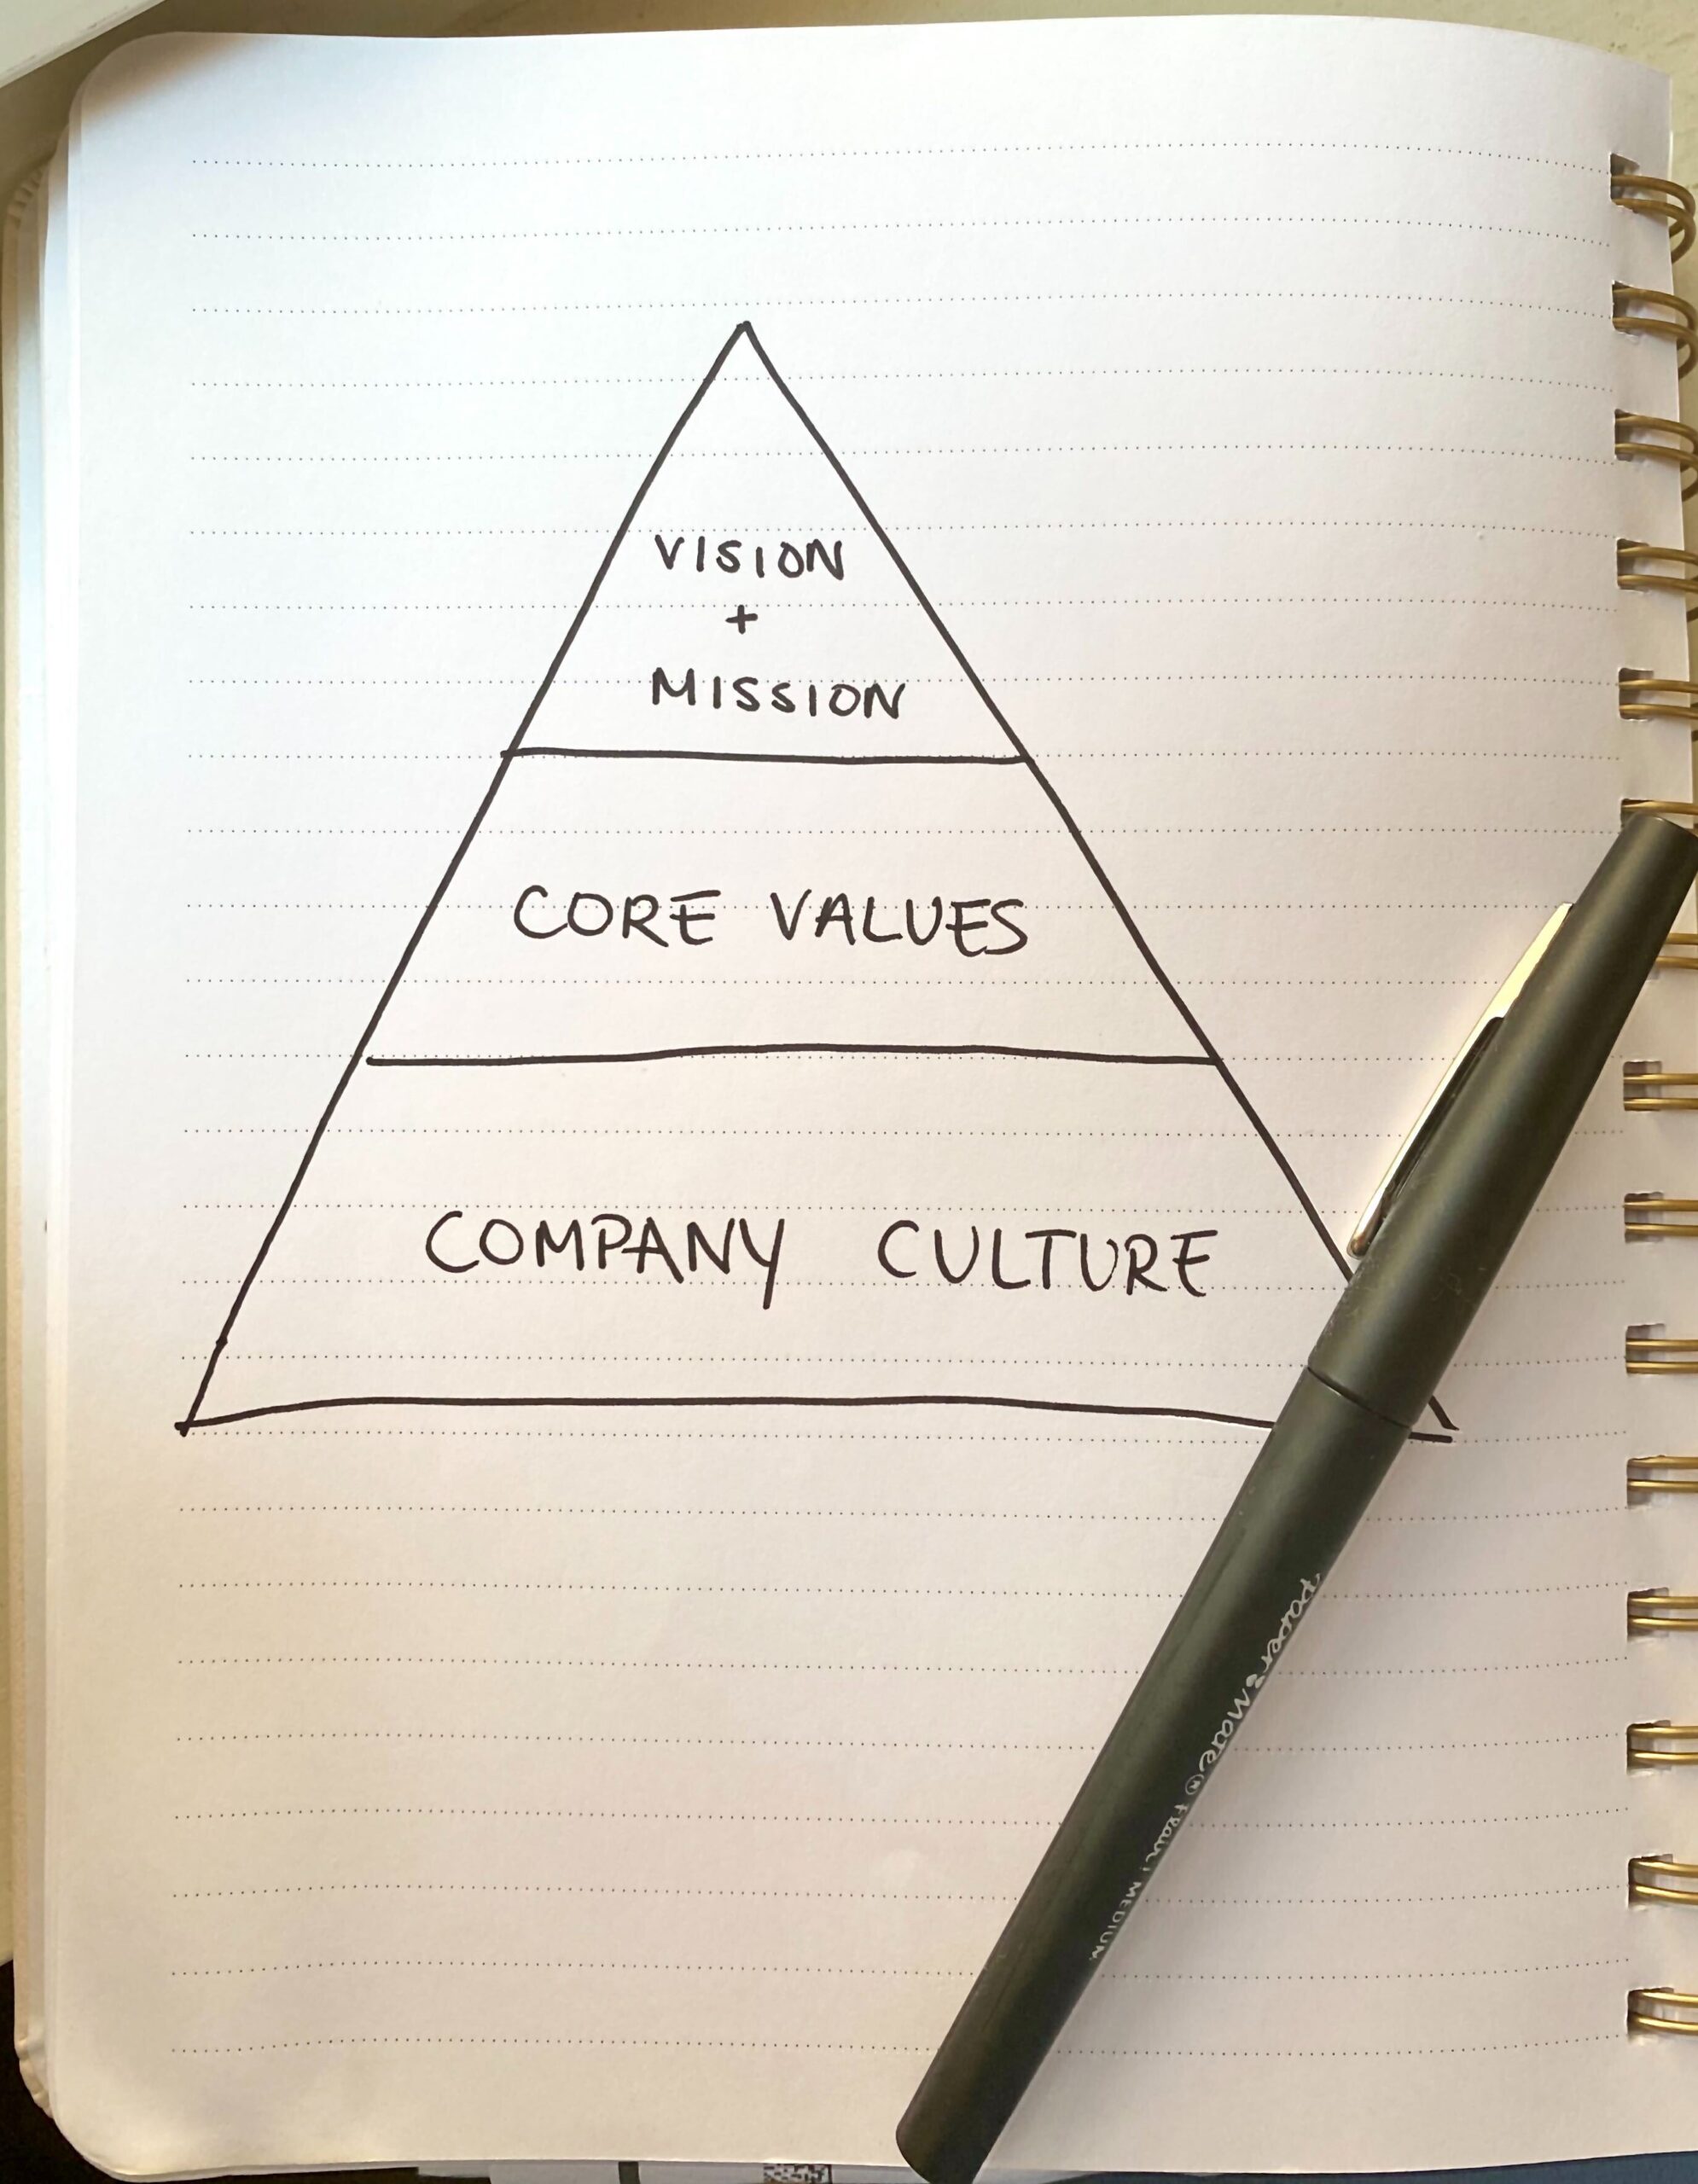 Friday Features: Why Building a Great Company Culture is Key To Success